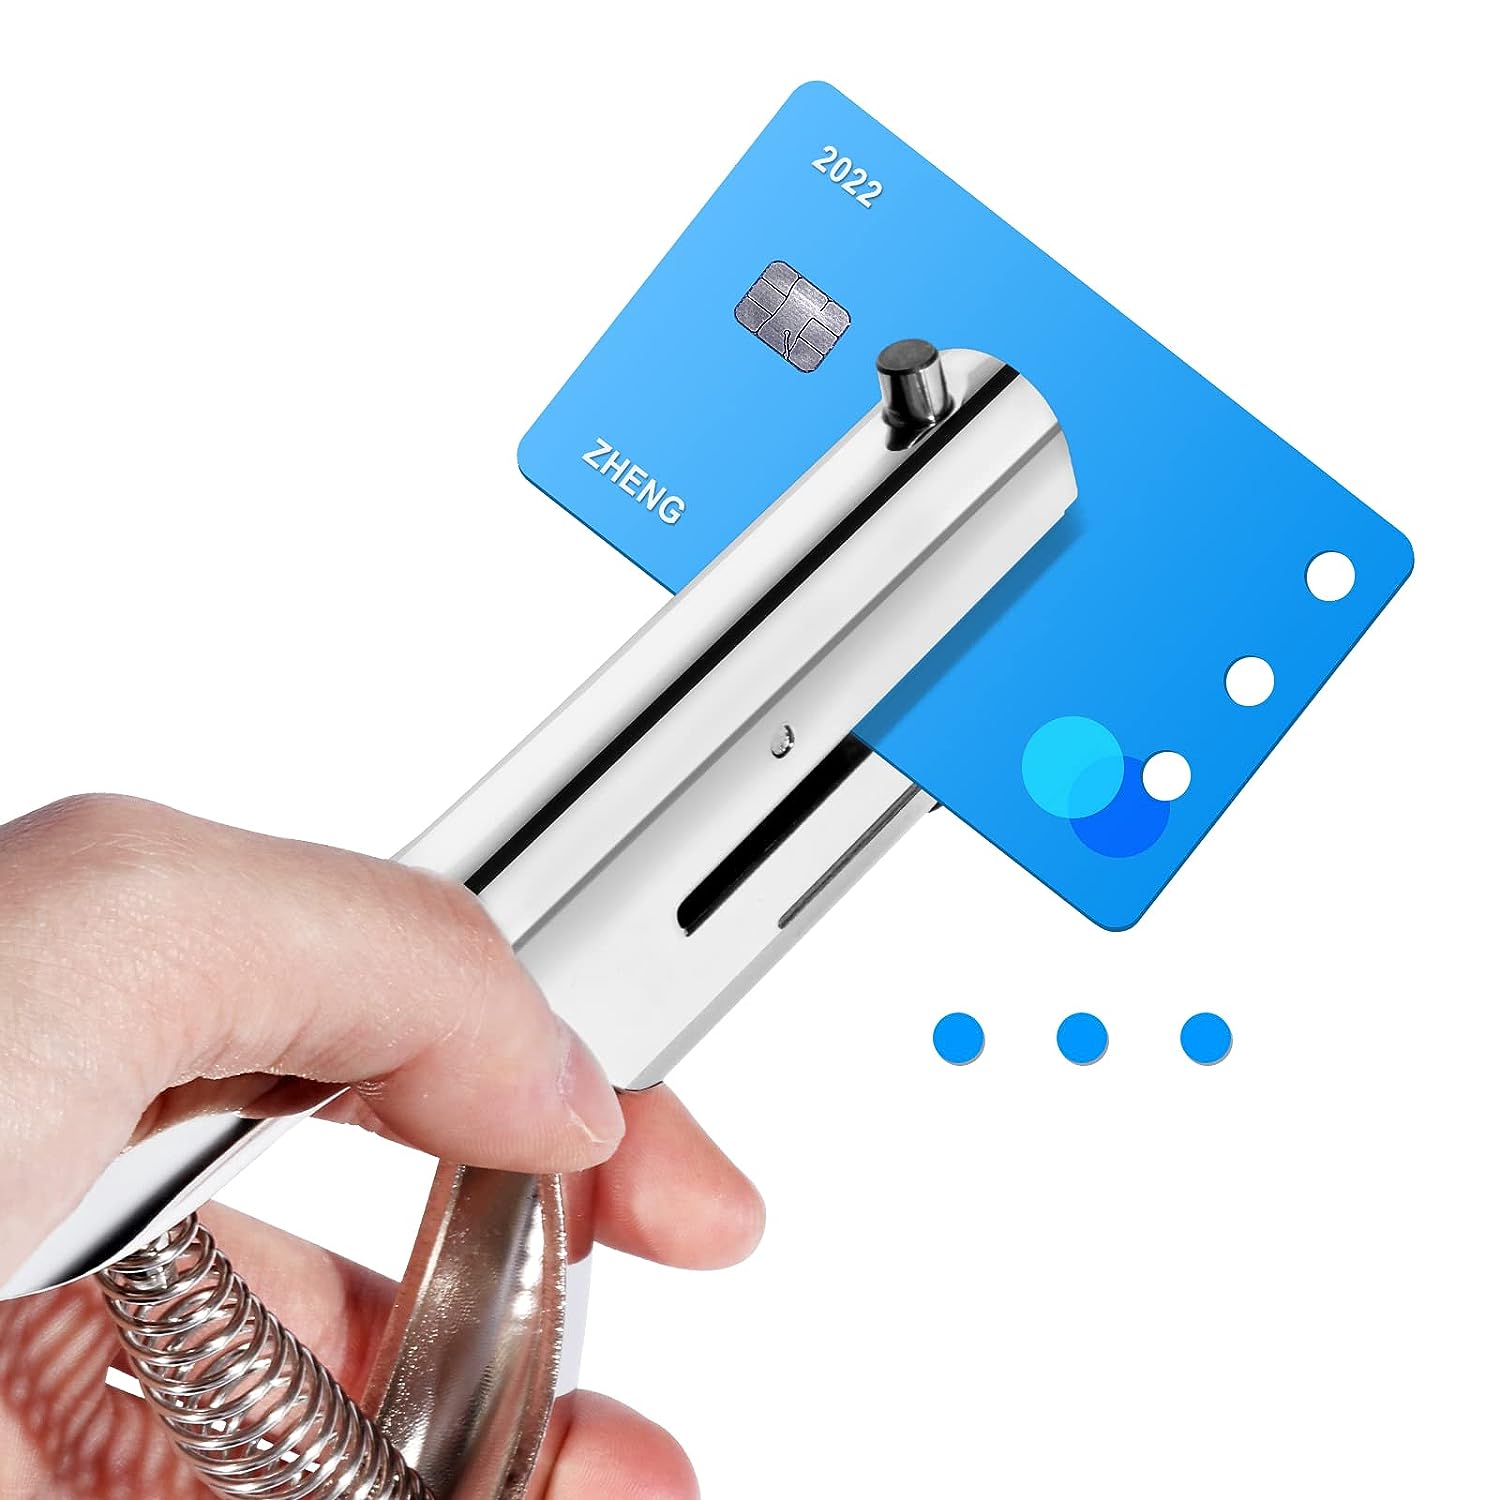 1/8 inch Hole Punch, Single Hole Punch for ID Cards Heavy Duty Hole Punch,  Paper Punch Portable Hand Held Long Hole Punch Small Hole Puncher for Paper